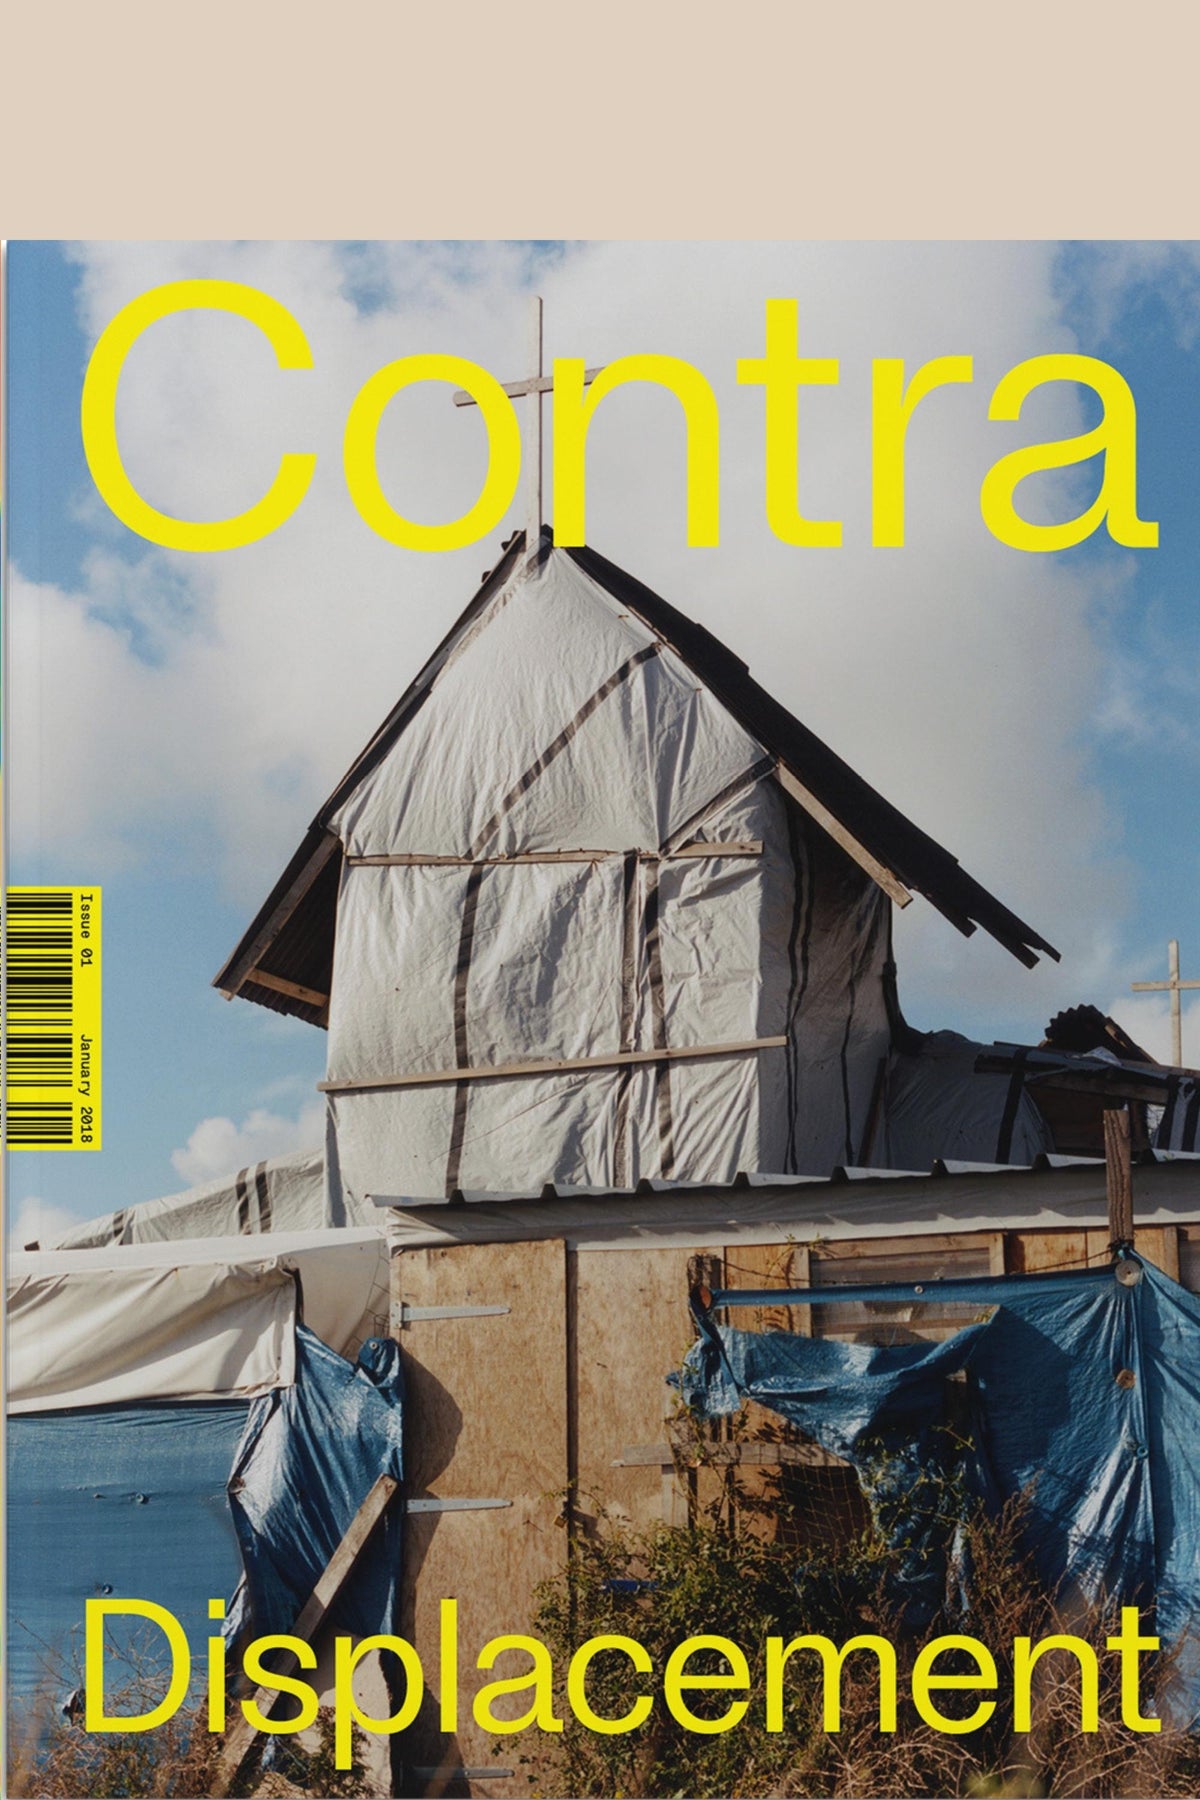 Contra Issue 01 Displacement